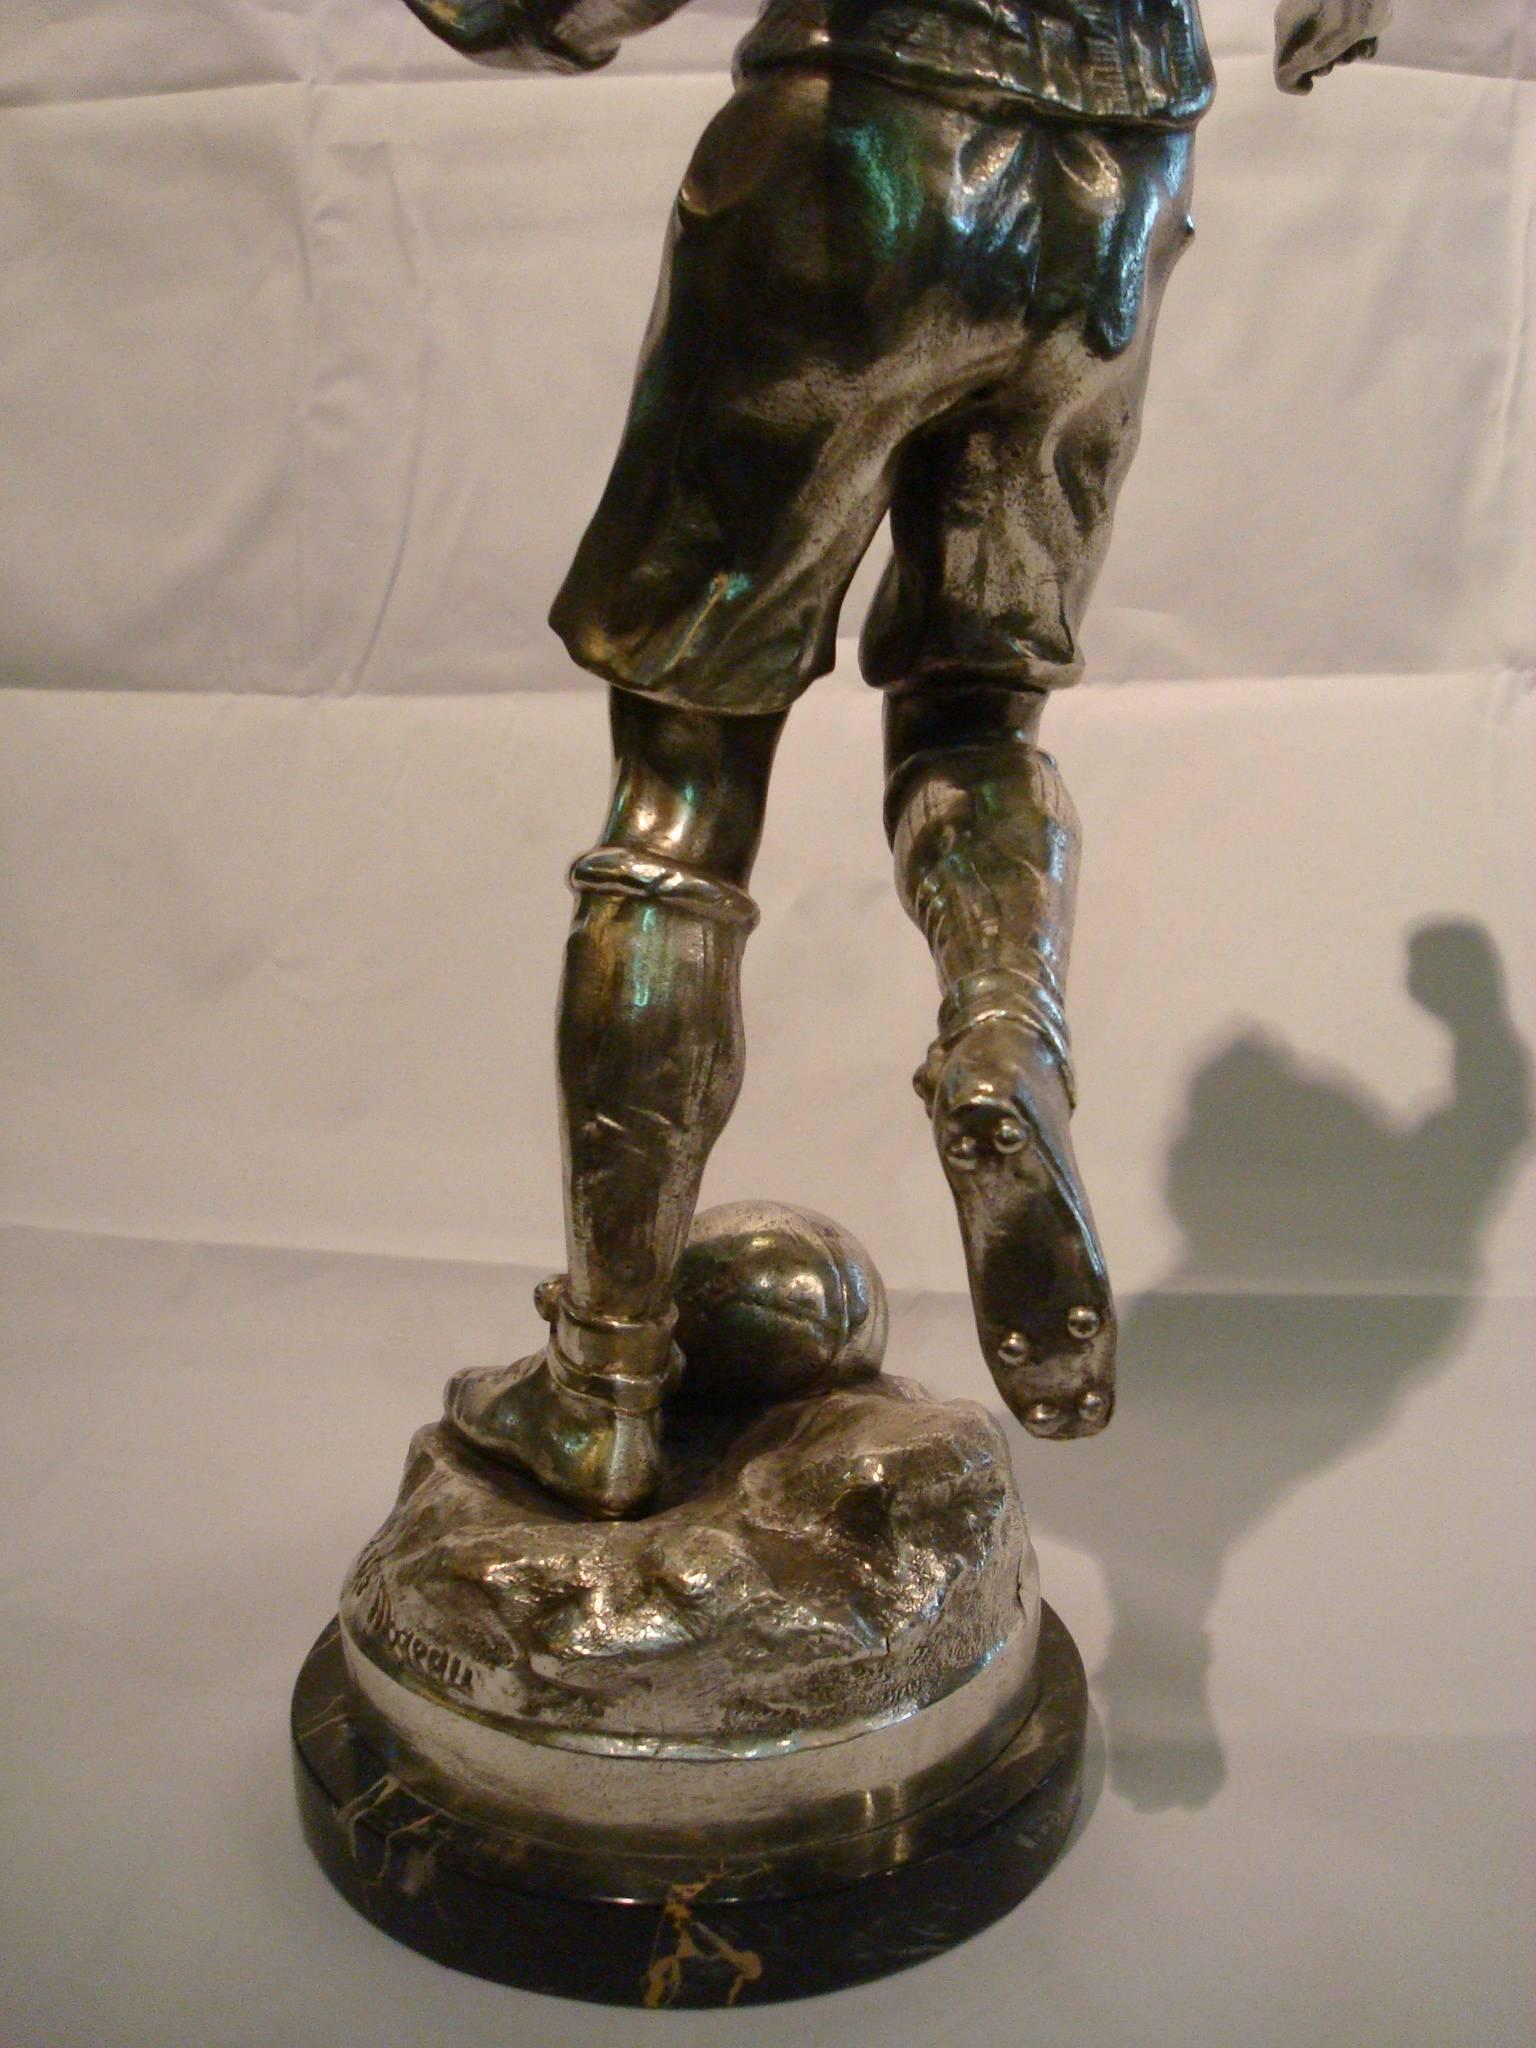 Soccer - Football player figure - sculpture - trophy. France, 1920s. Mounted over a marble base. 